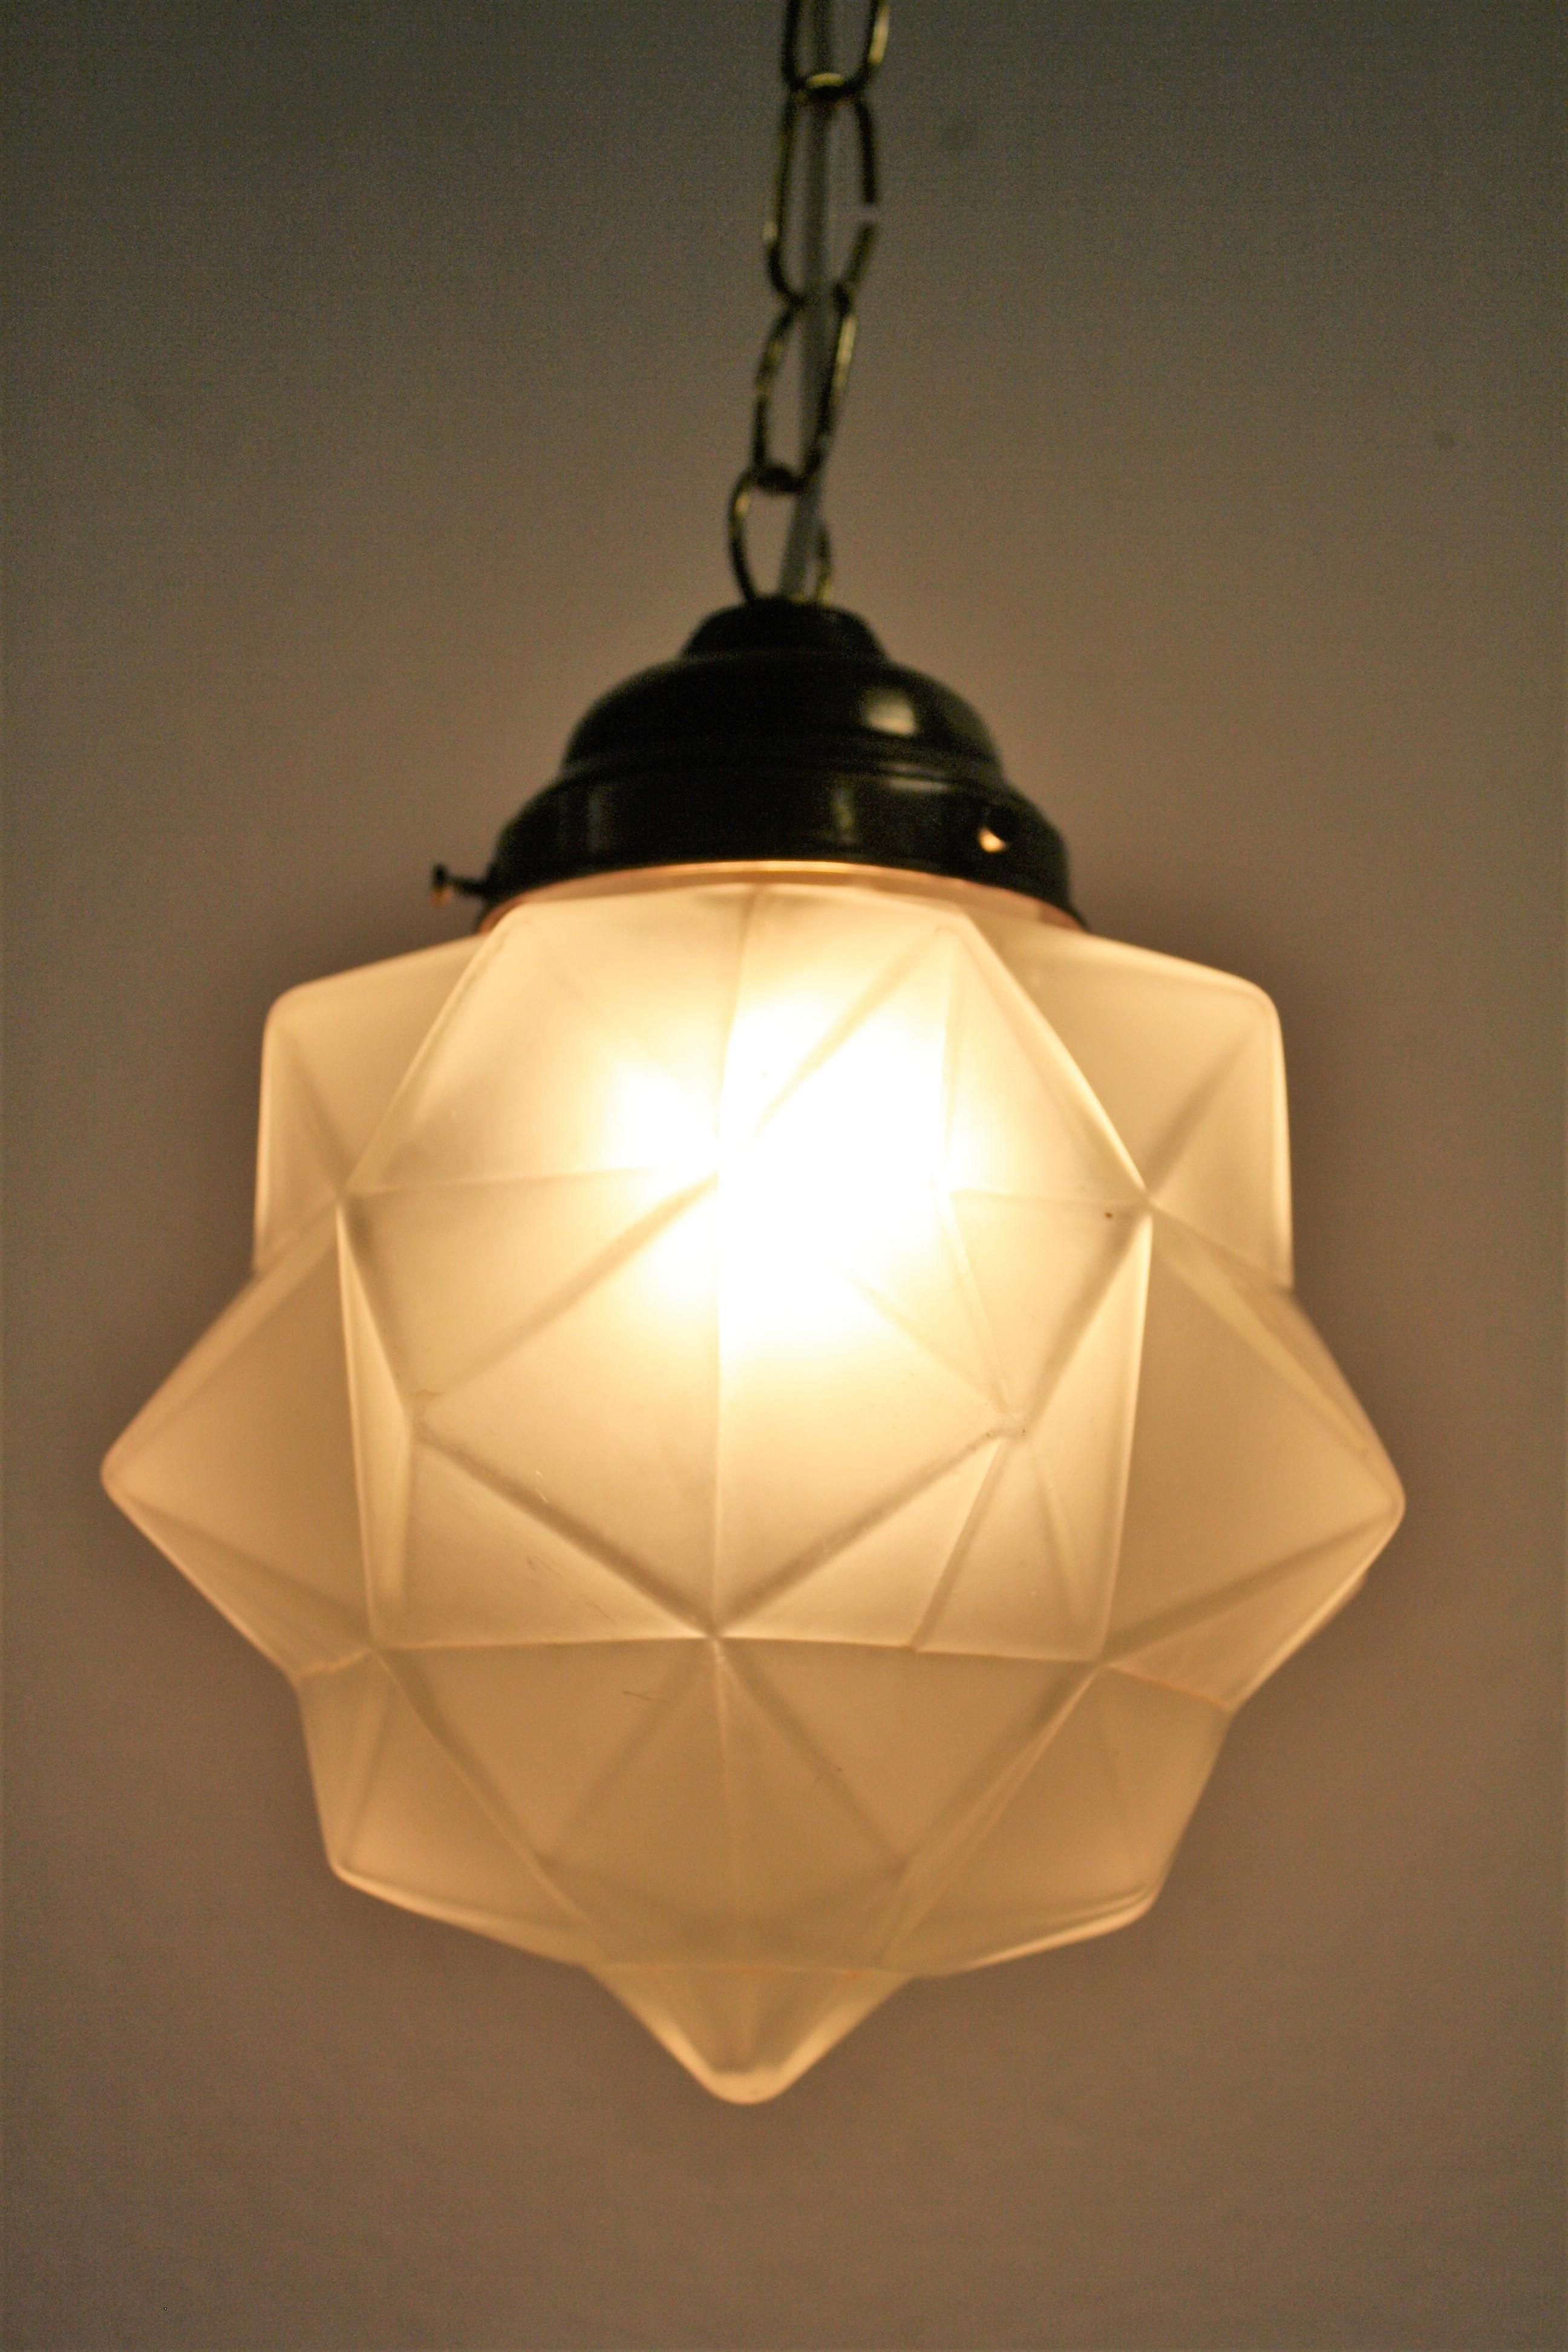 Antique Art Deco era starburst or bolster pendant light.

The lamp has a typical Art Deco design.

Supplied with an aged brass chain and shade holder.

Rewired, tested and ready to use with a regular E27 light bulb.

1930s,